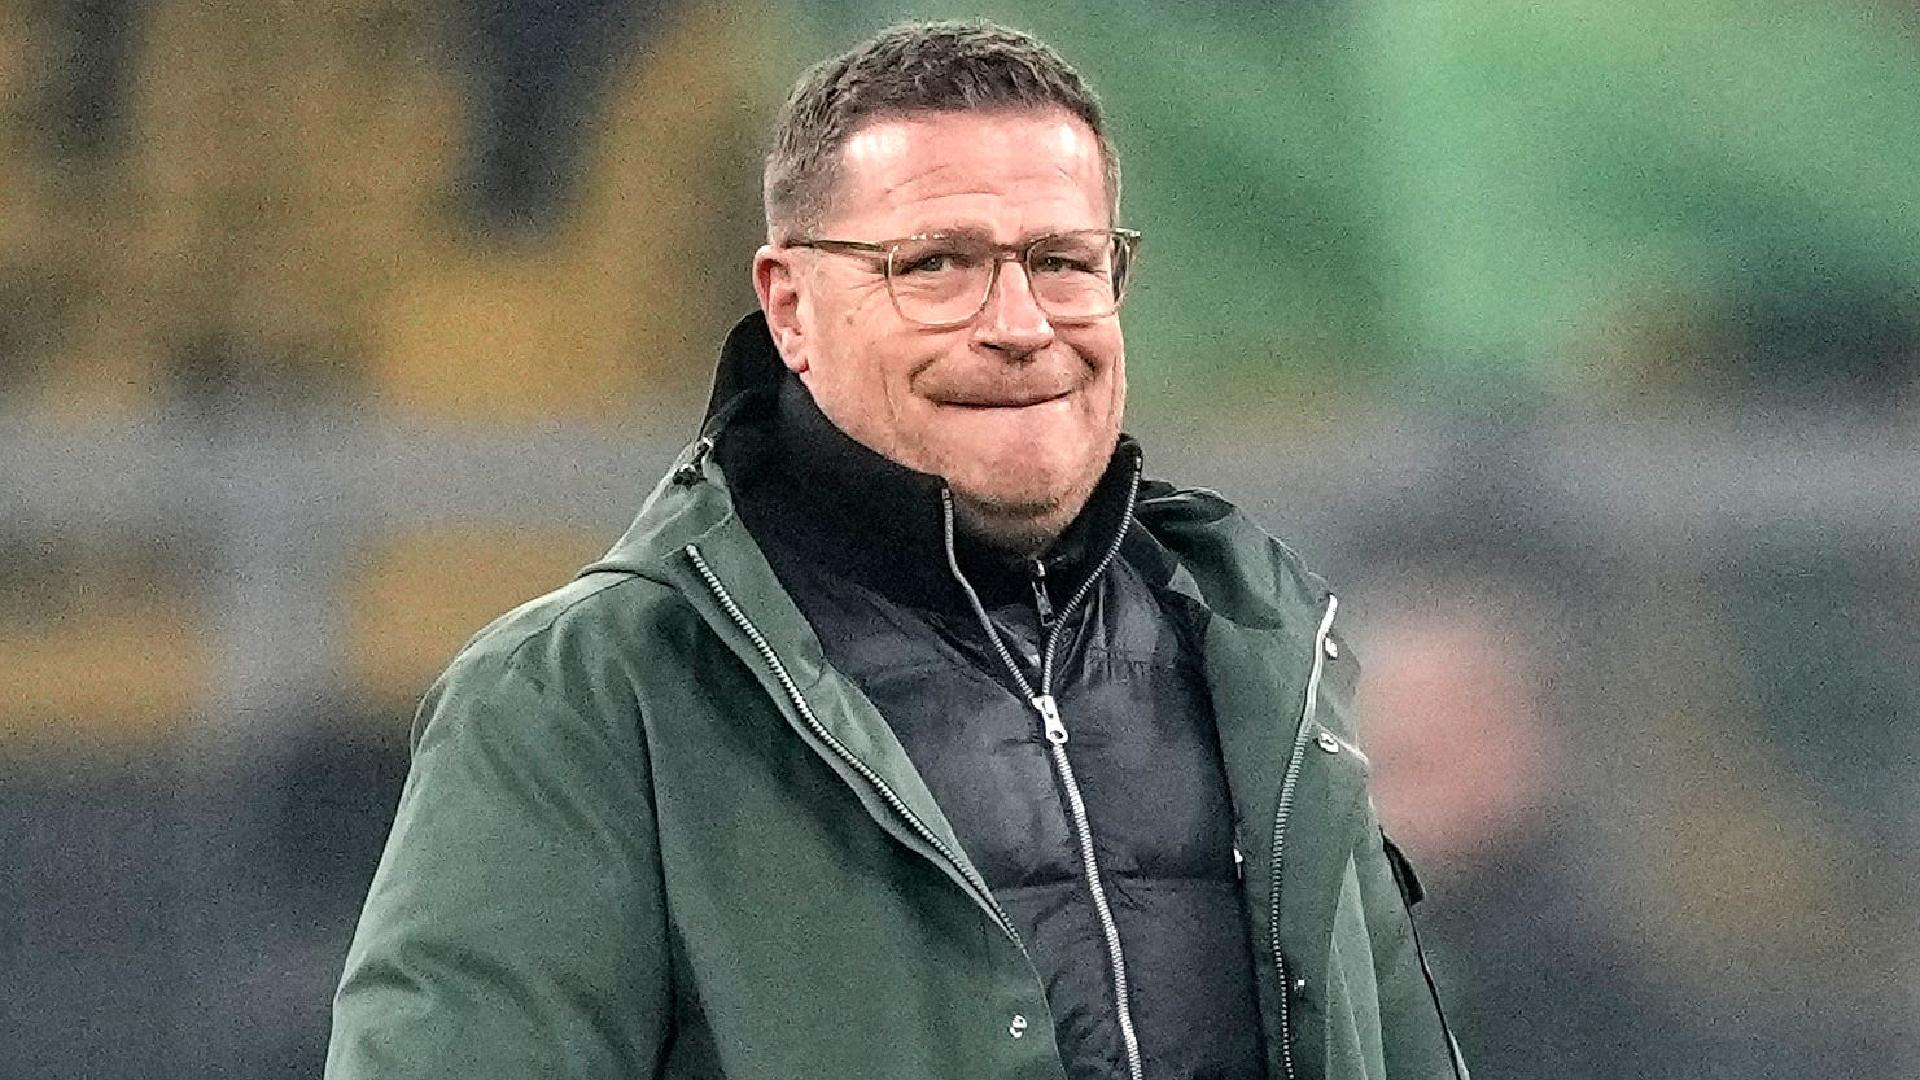 Bayern Munich appoint former RB Leipzig sporting director Max Eberl to board